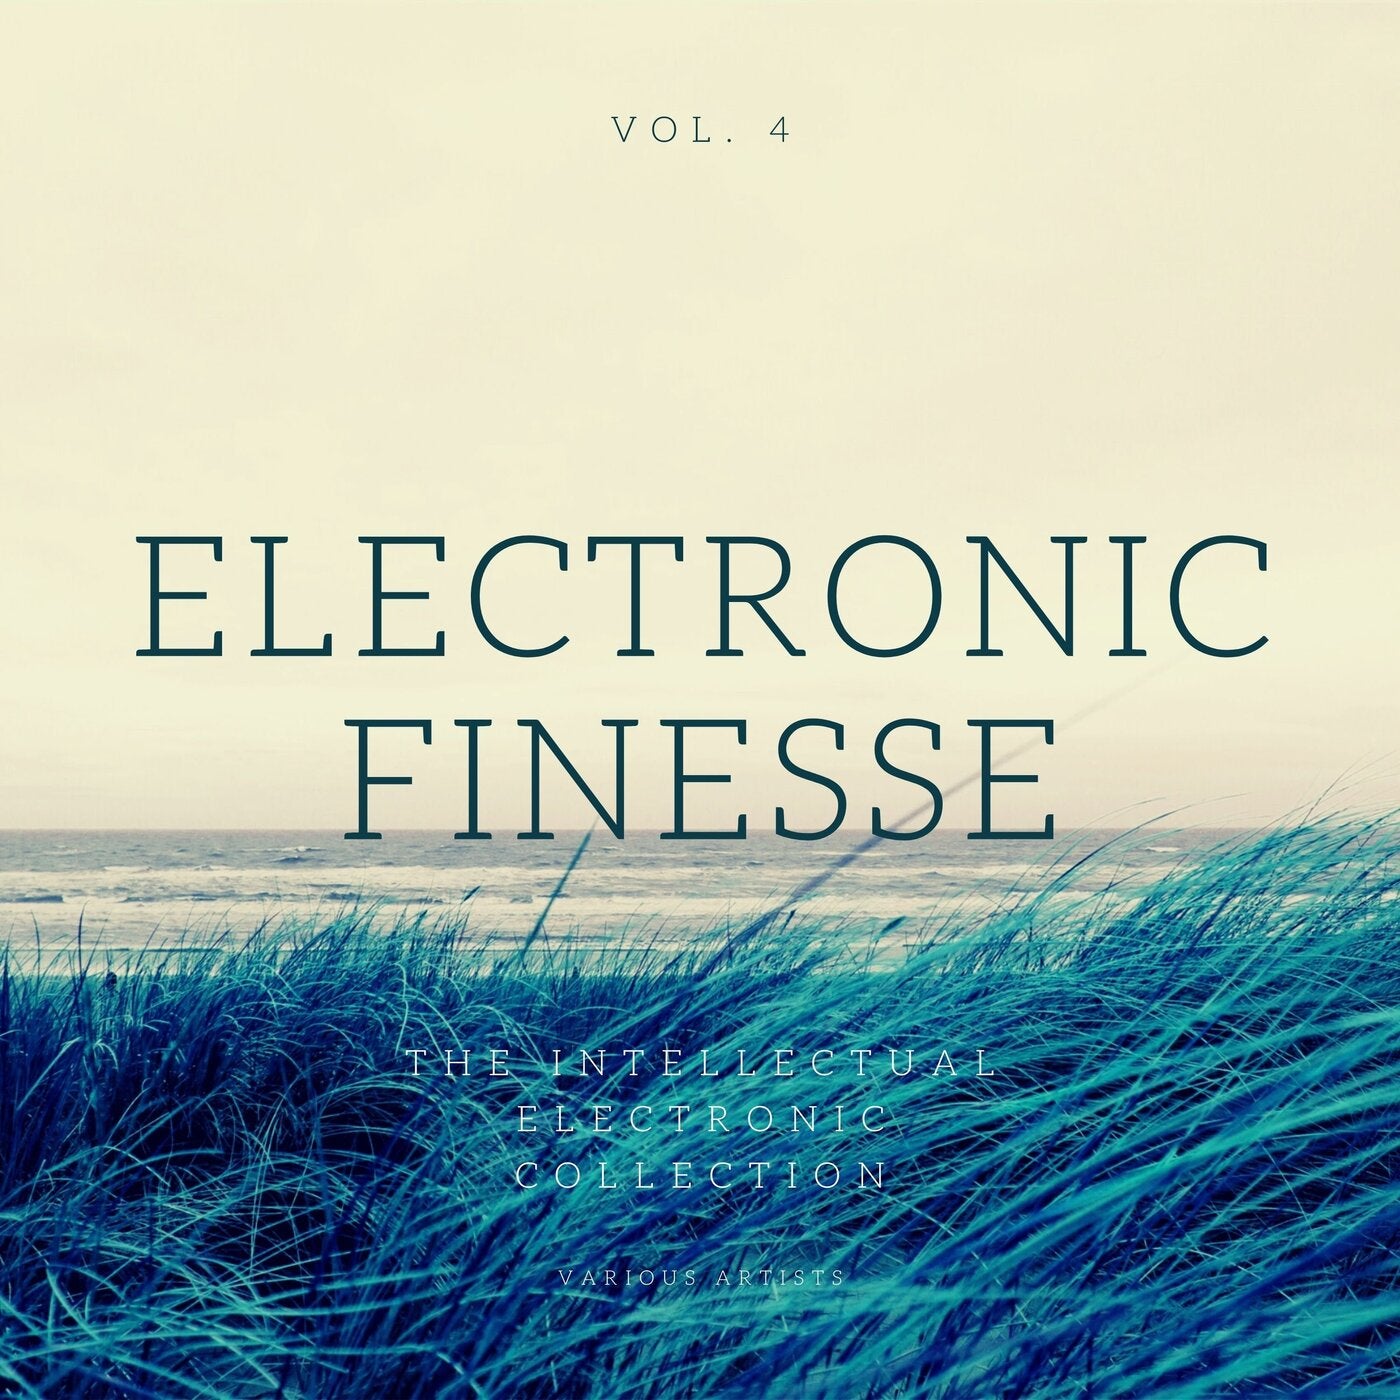 Electronic Finesse (The Intellectual Electronic Collection), Vol. 4